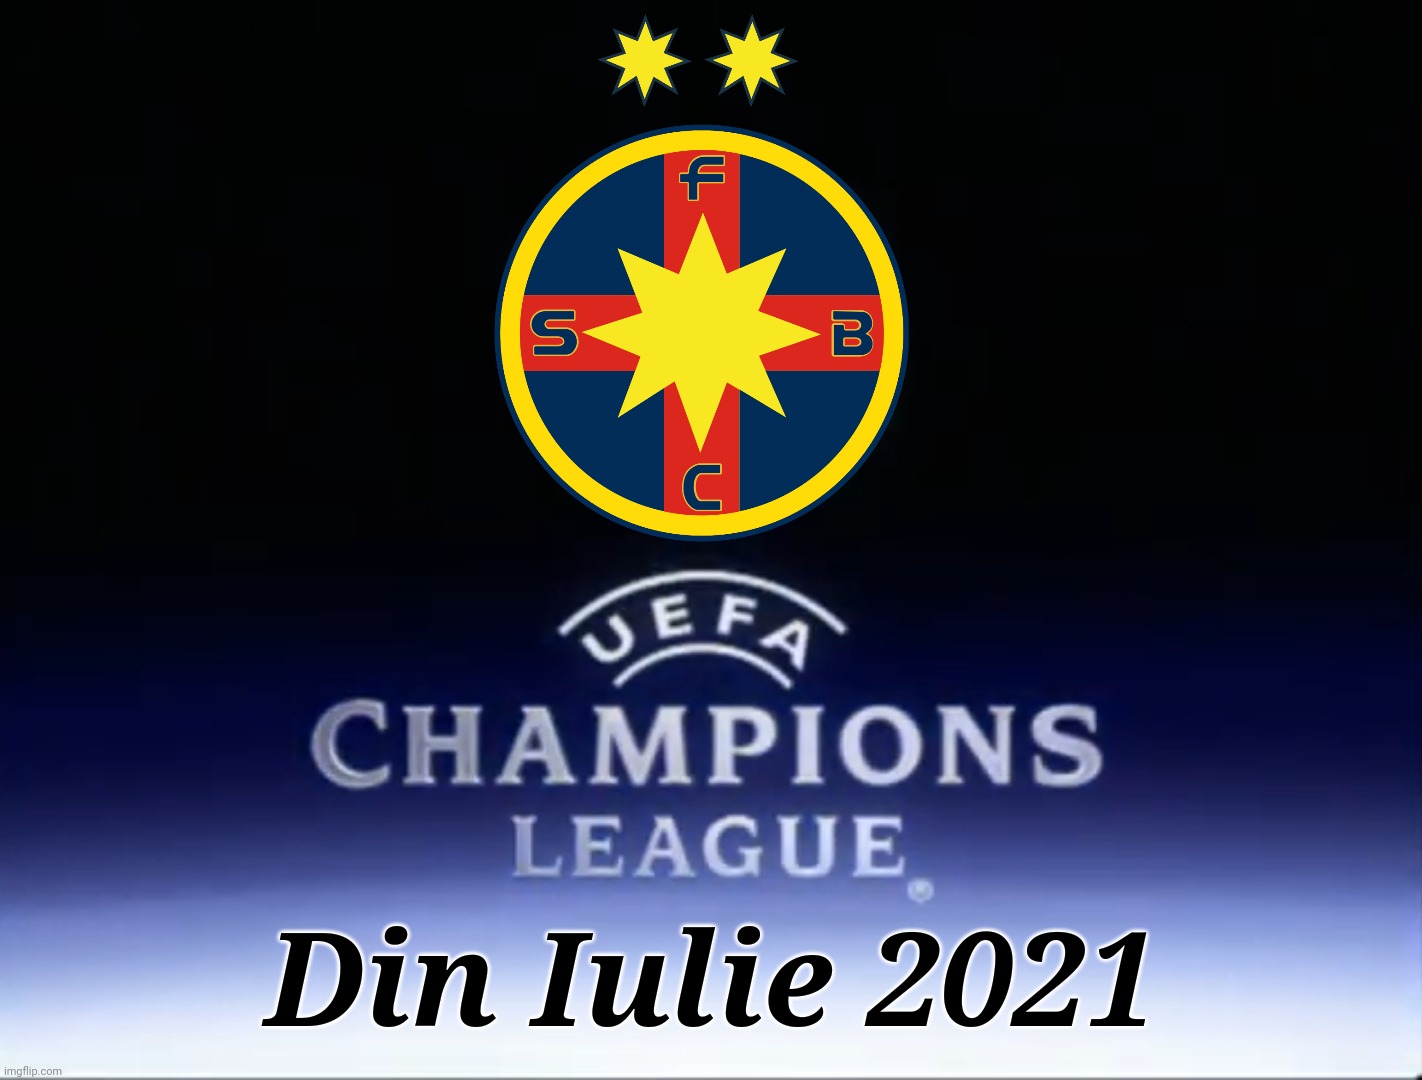 FCSB in Champions League 2021-2022. Forza Steaua Hey Hey | Din Iulie 2021 | image tagged in memes,fcsb,steaua,champions league | made w/ Imgflip meme maker